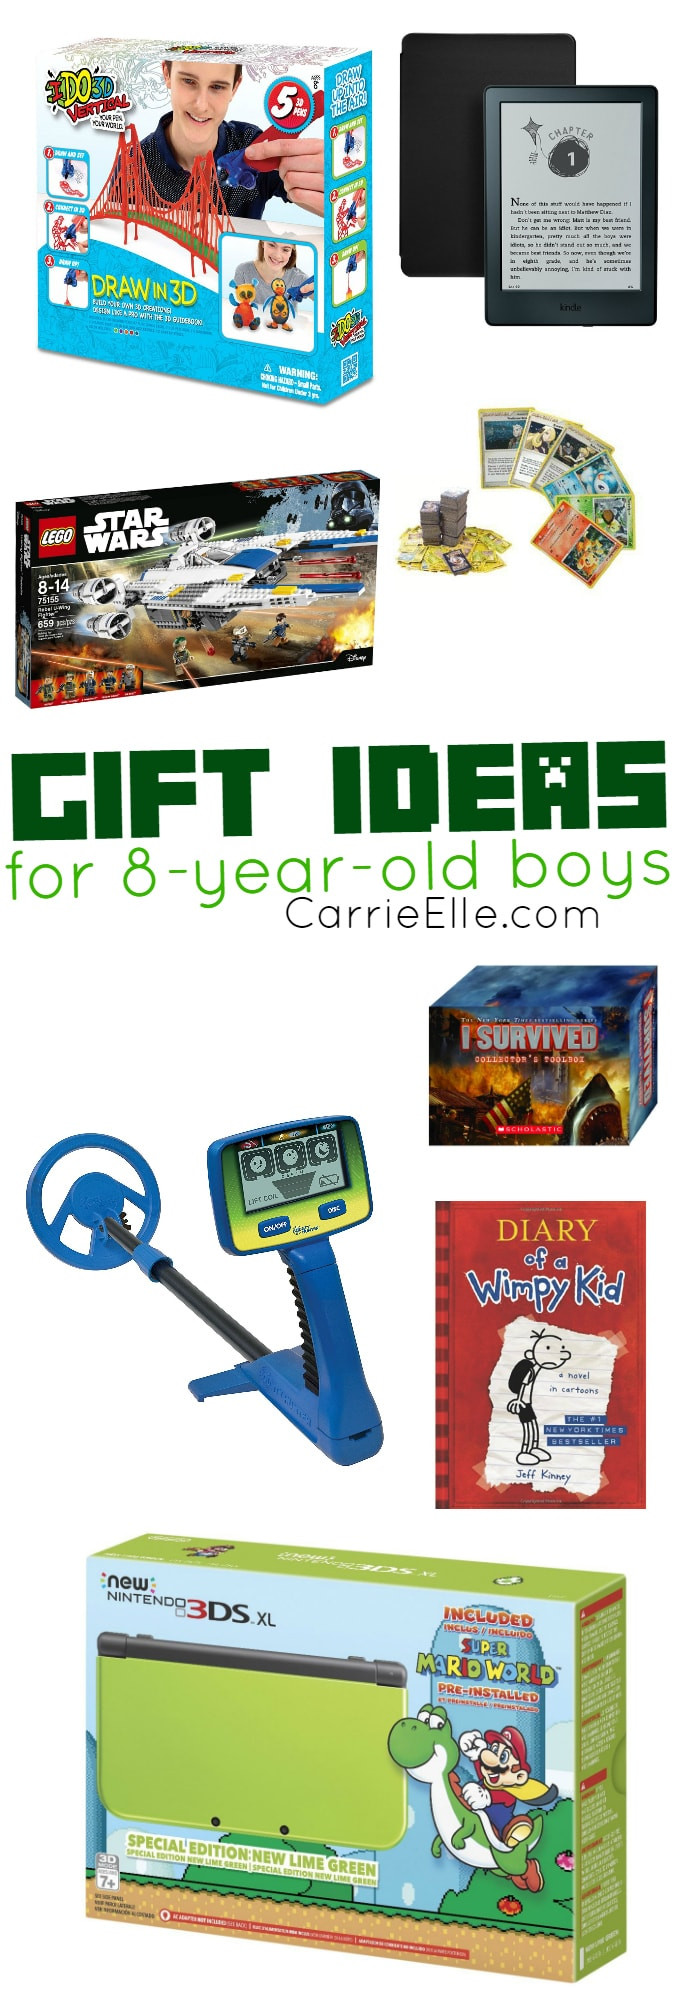 Gift Ideas For 8 Year Old Boys
 Gift Ideas for 8 Year Old Boys Carrie Elle